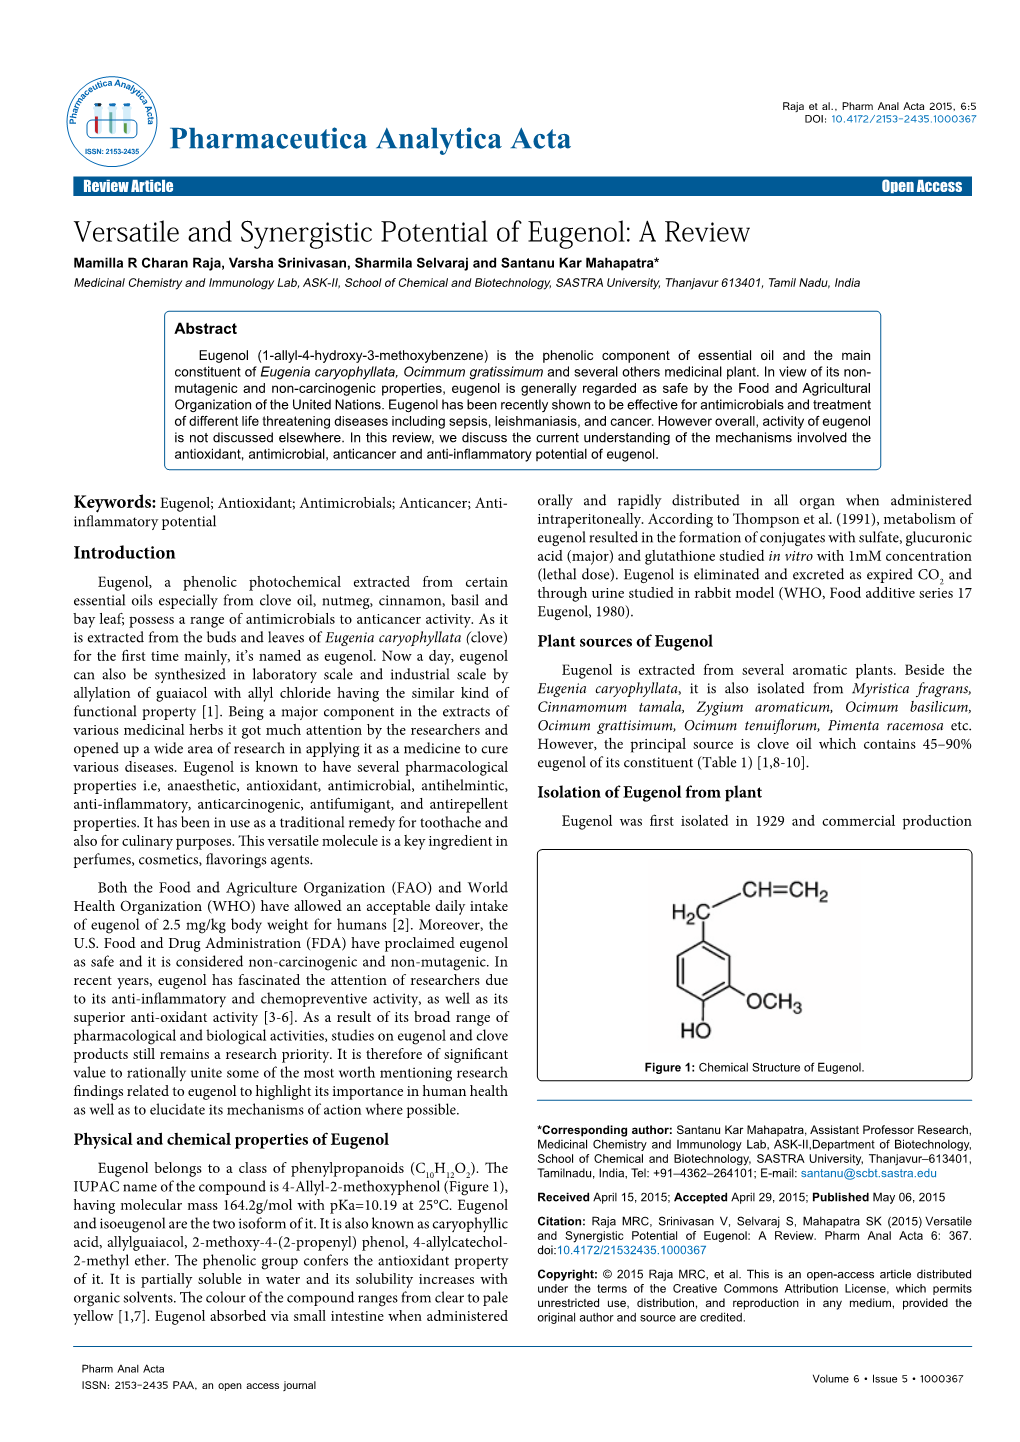 Versatile and Synergistic Potential of Eugenol